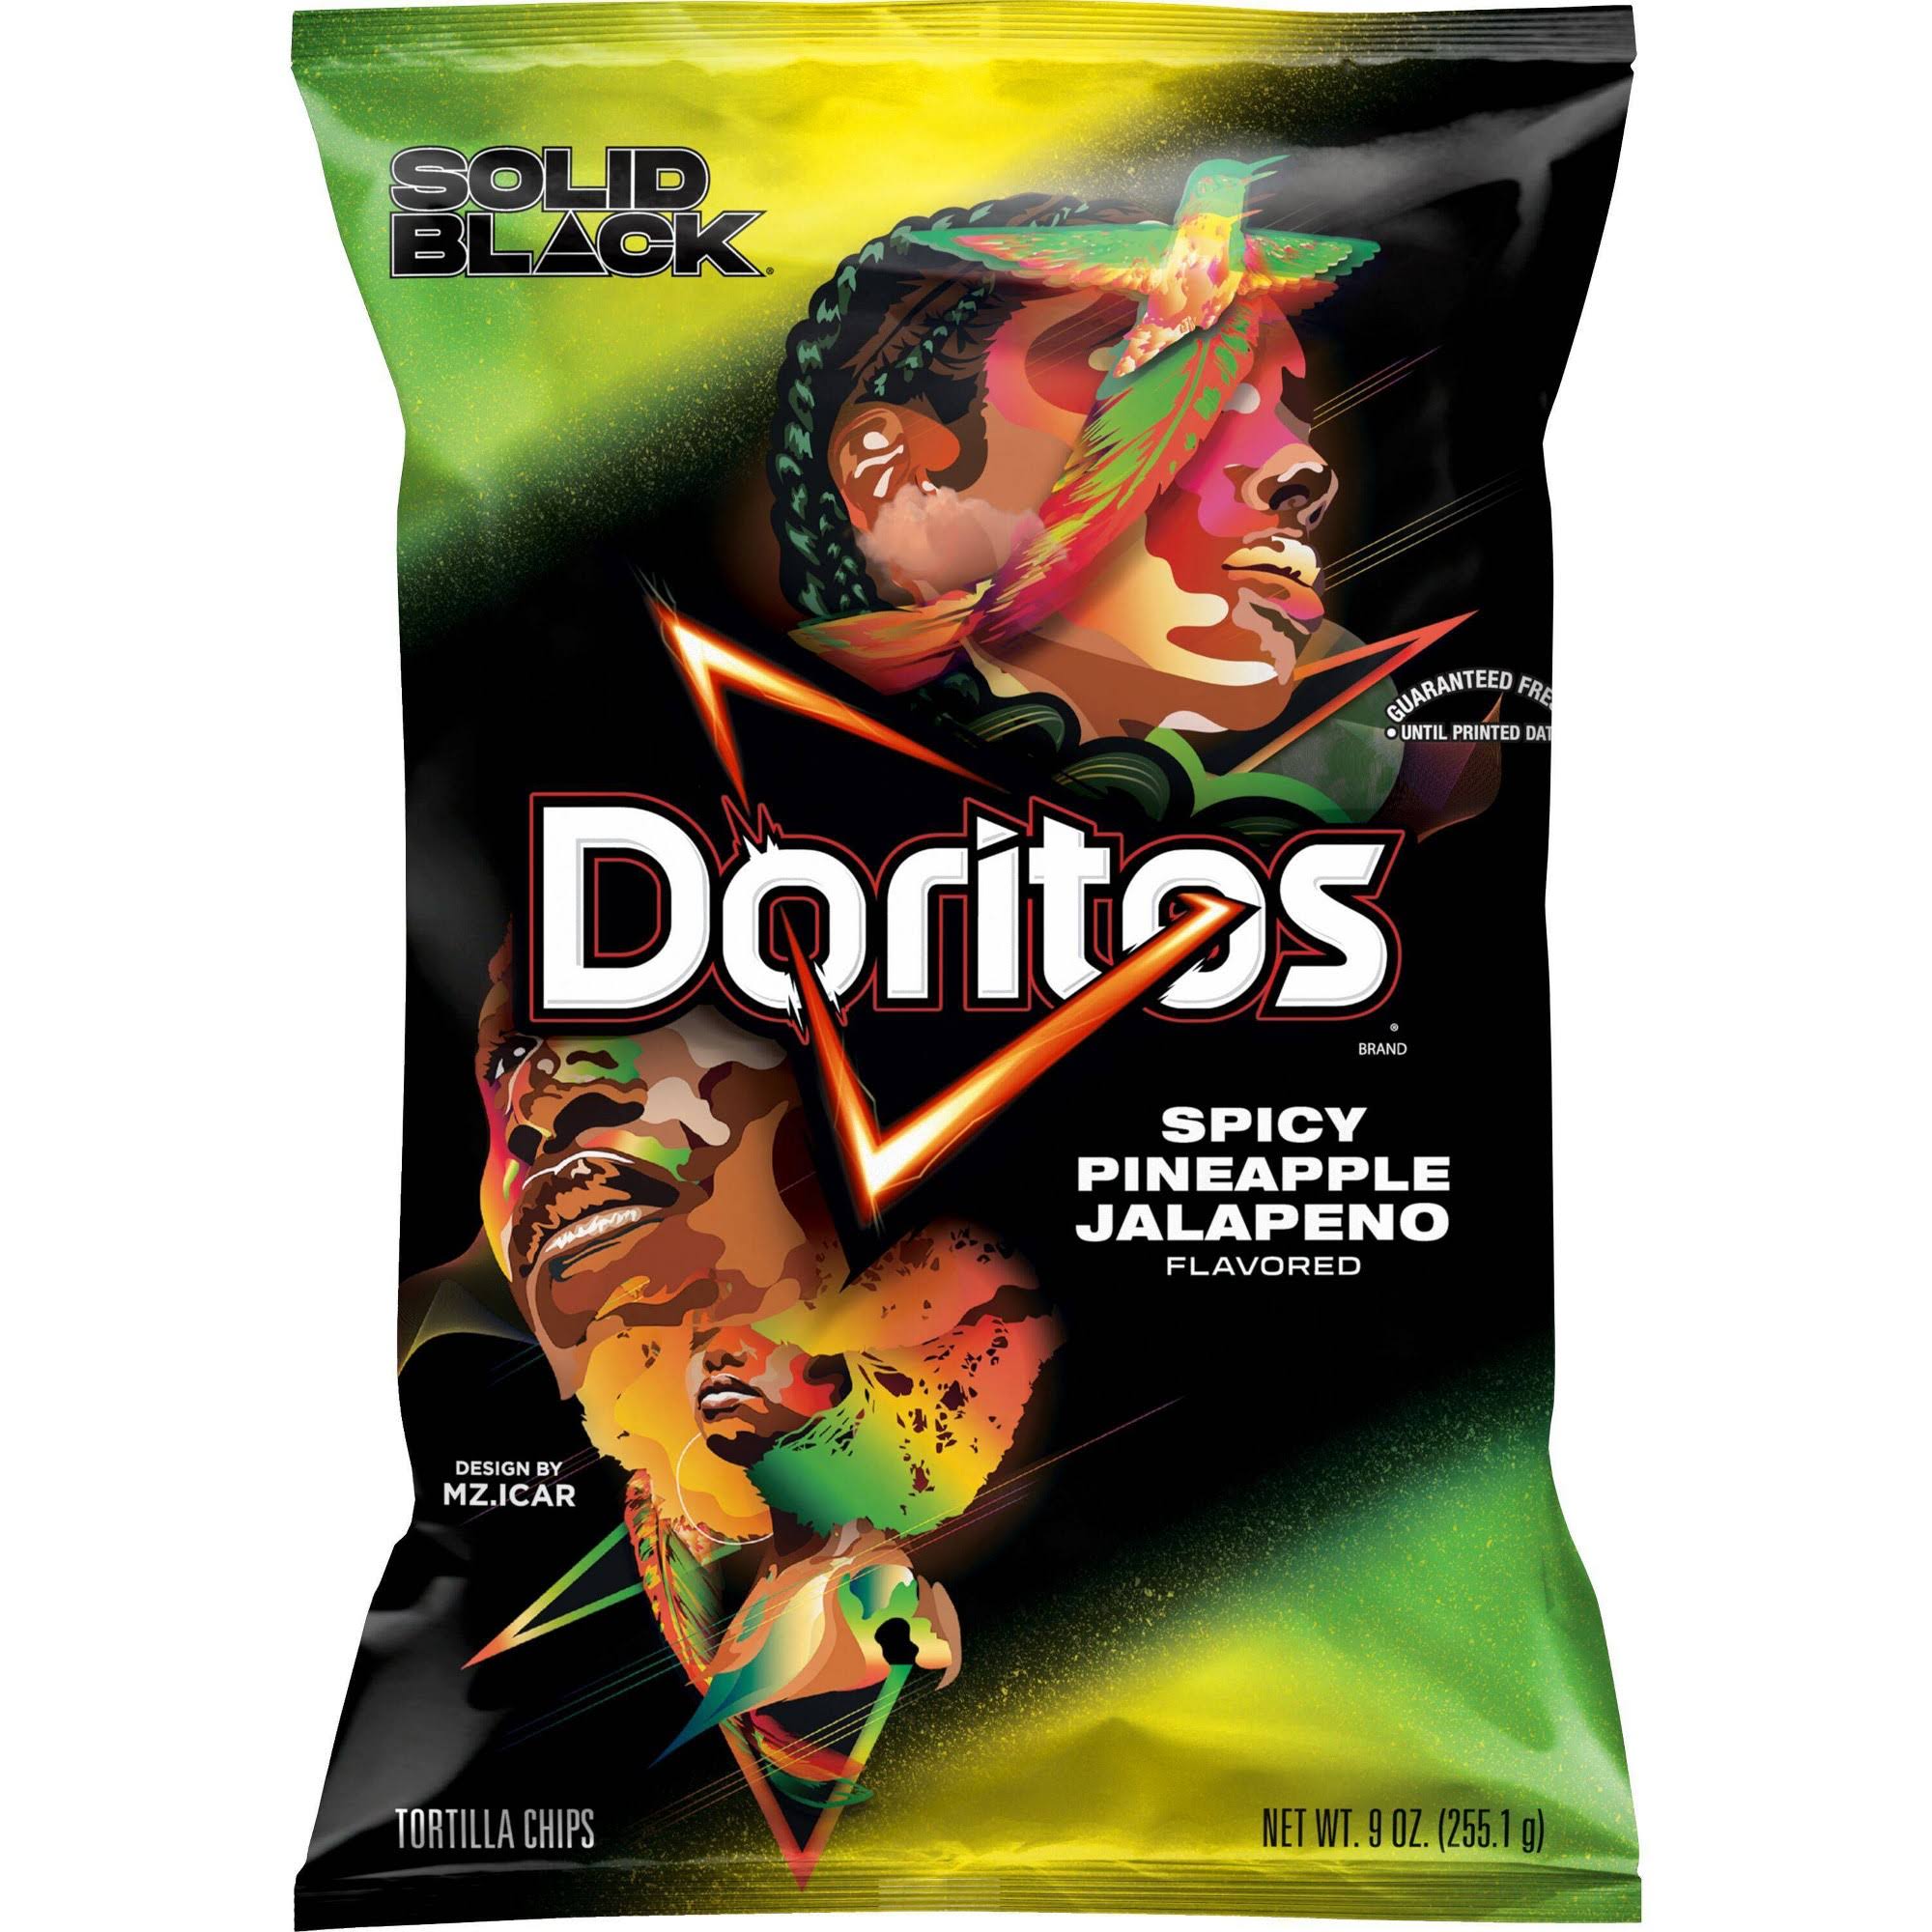 Doritos Tortilla Chips, Spicy Pineapple Jalapeno Flavored - 9 oz